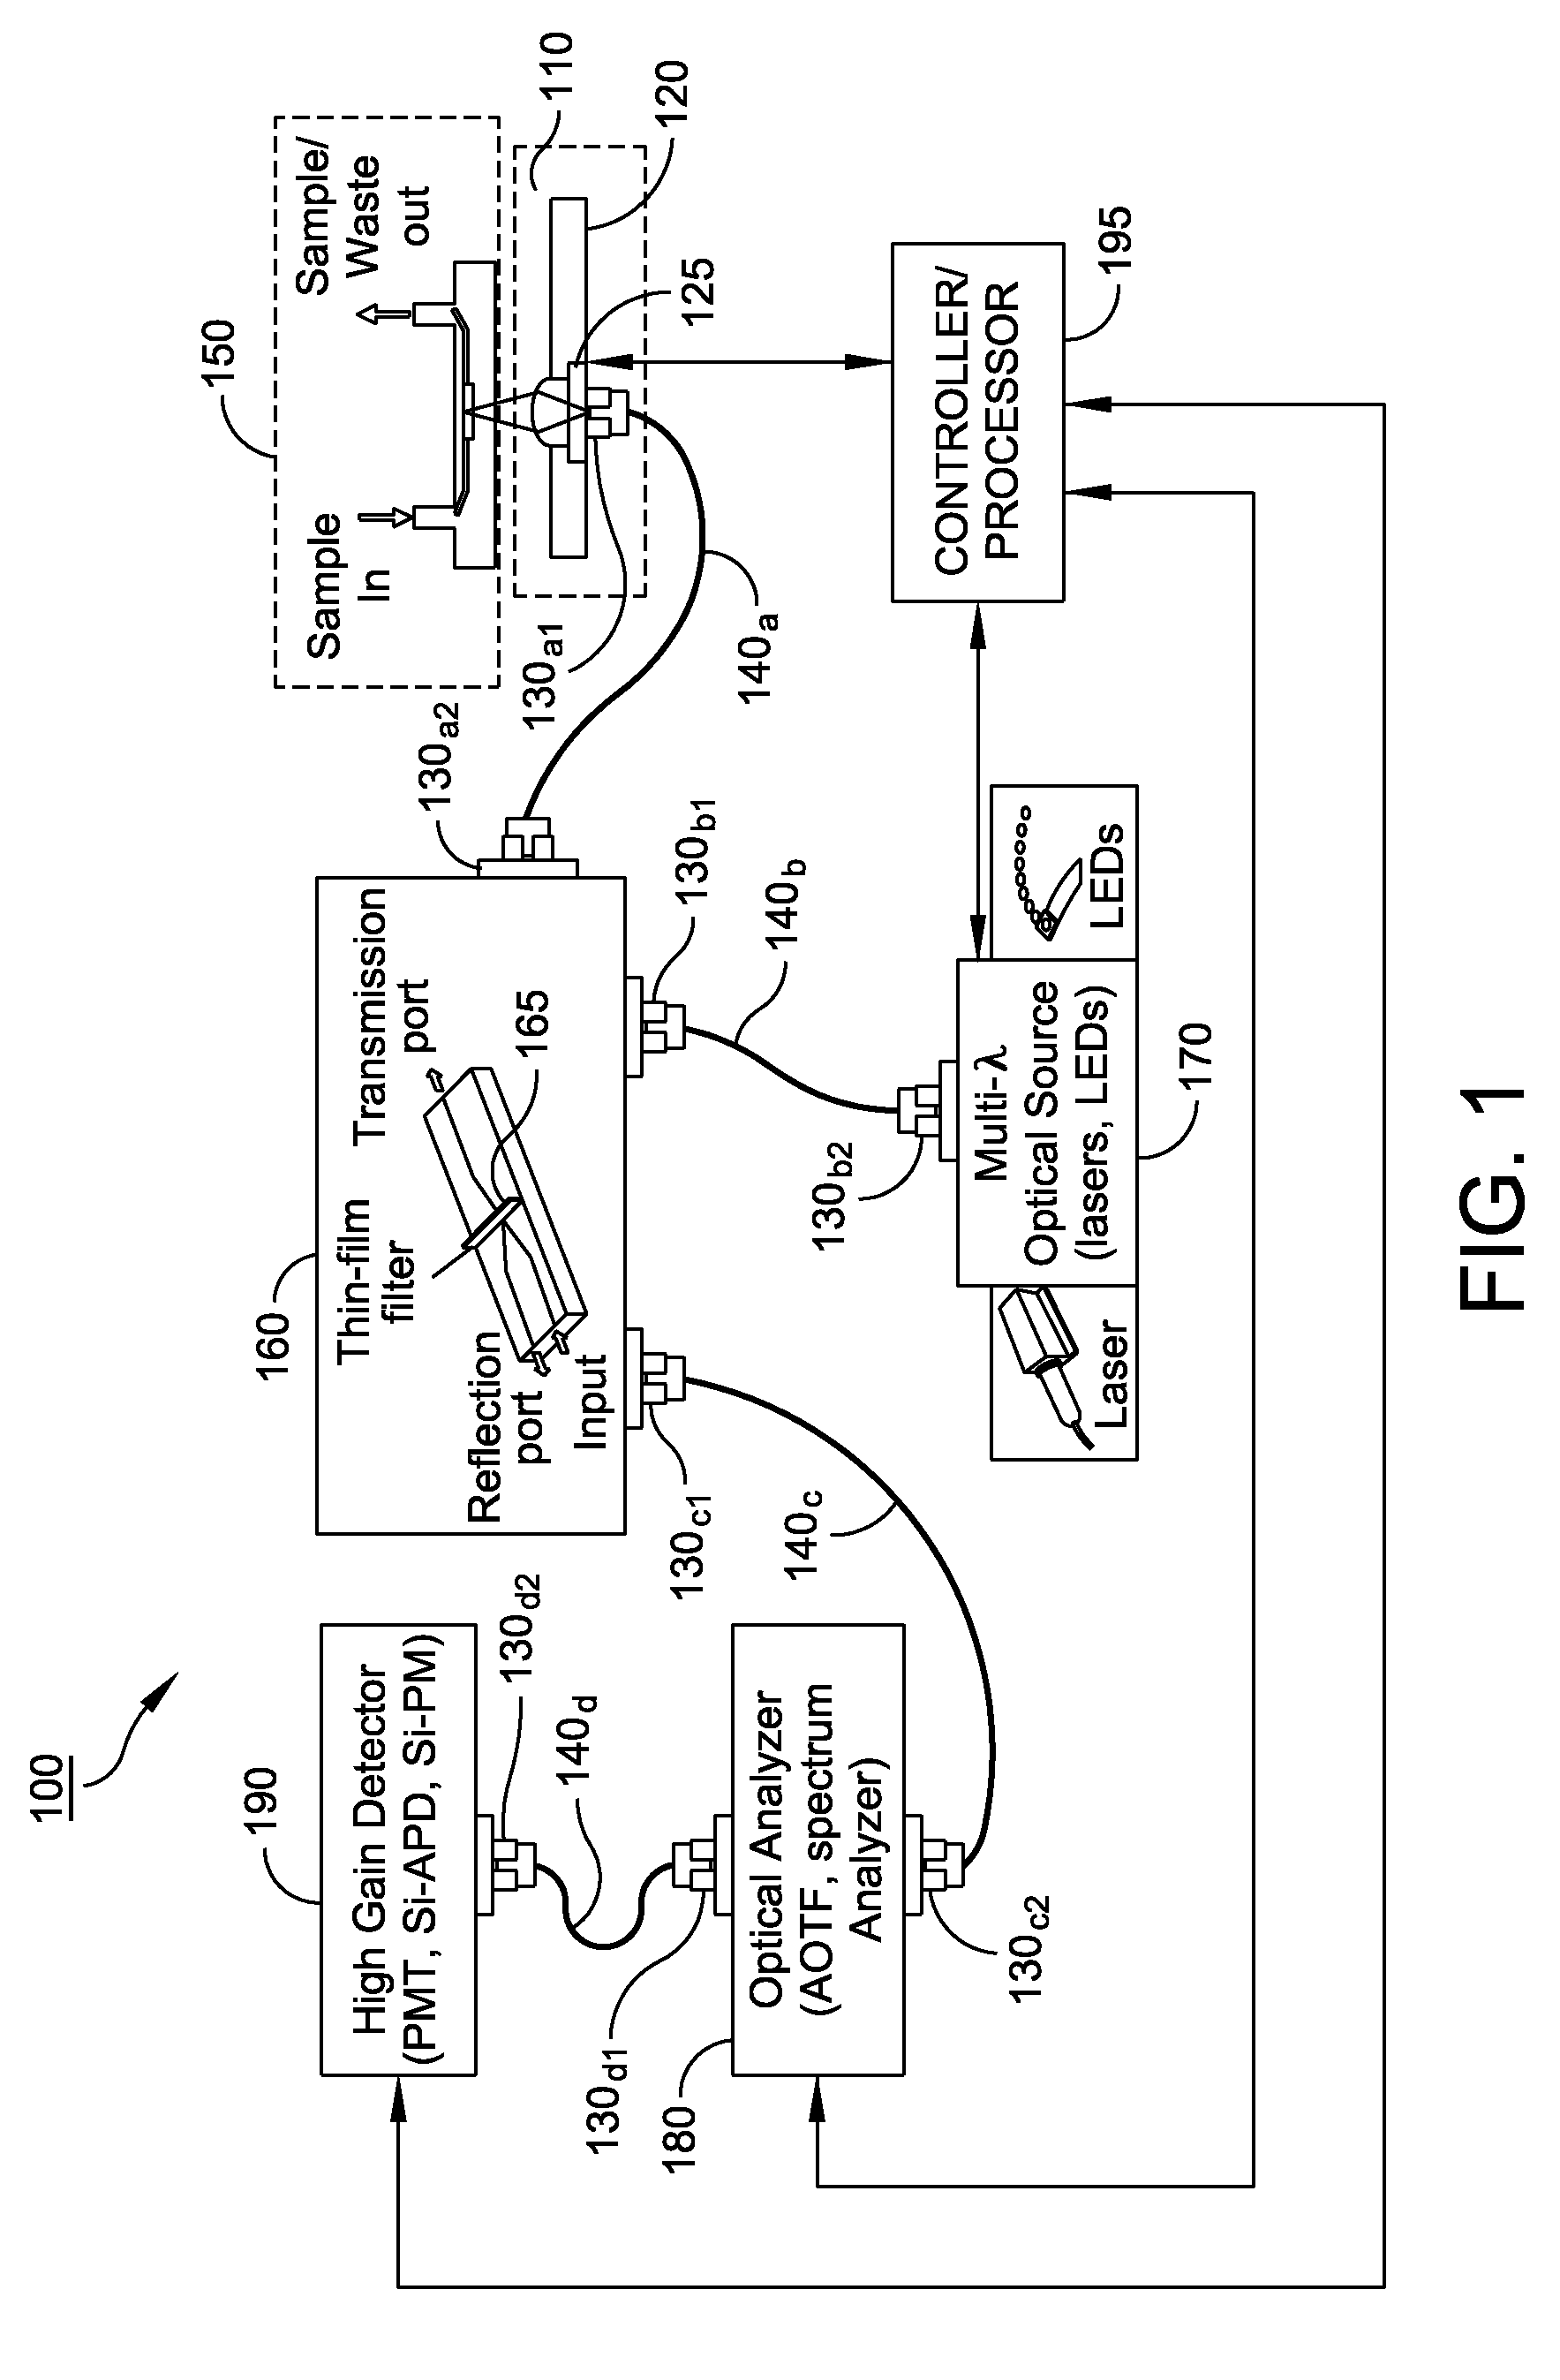 Modular optical diagnostic platform for chemical and biological target diagnosis and detection